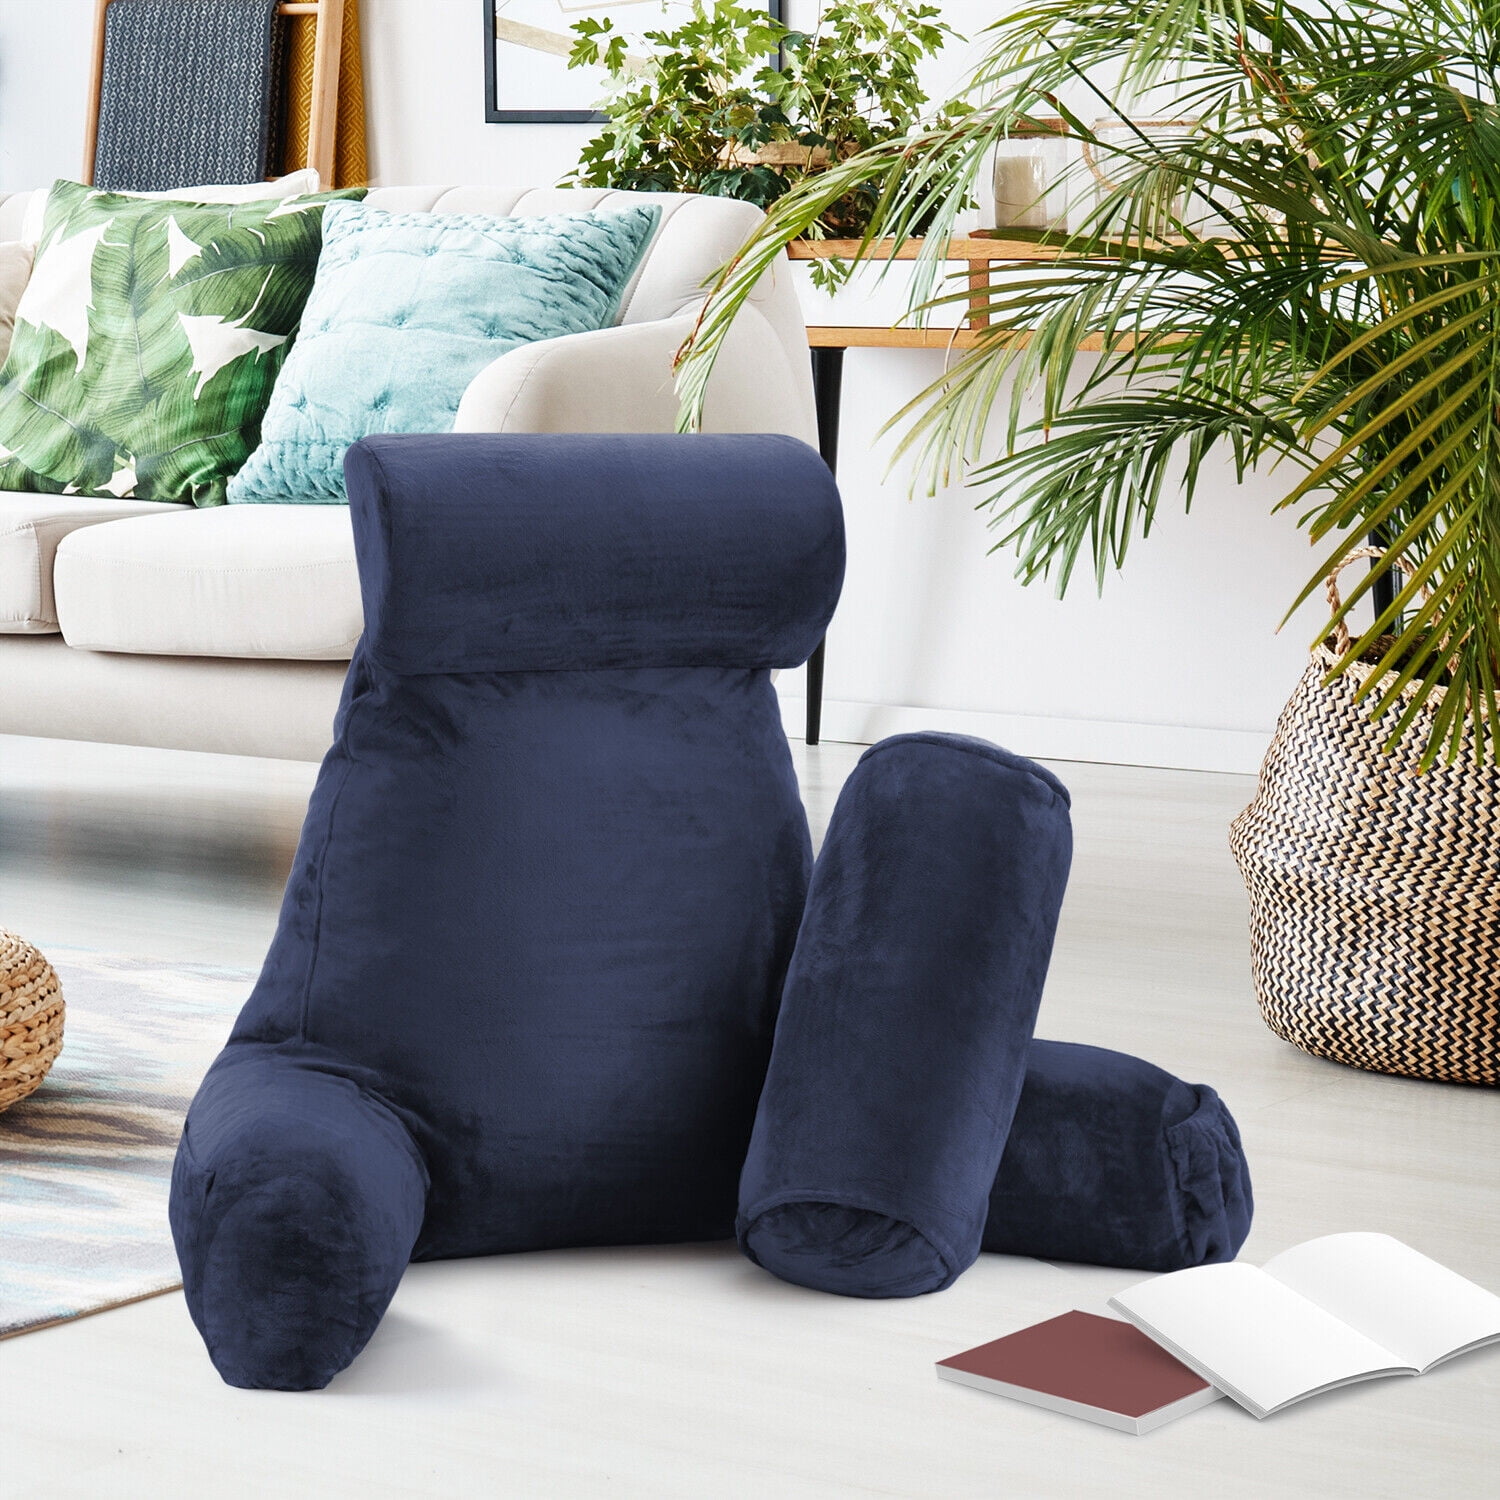 Joyching Backrest Reading Pillows for Sitting in Bed Adults - Plush Pillow  with Shredded Memory Foam Arm Rests Supportive Neck Pillow for Reading or